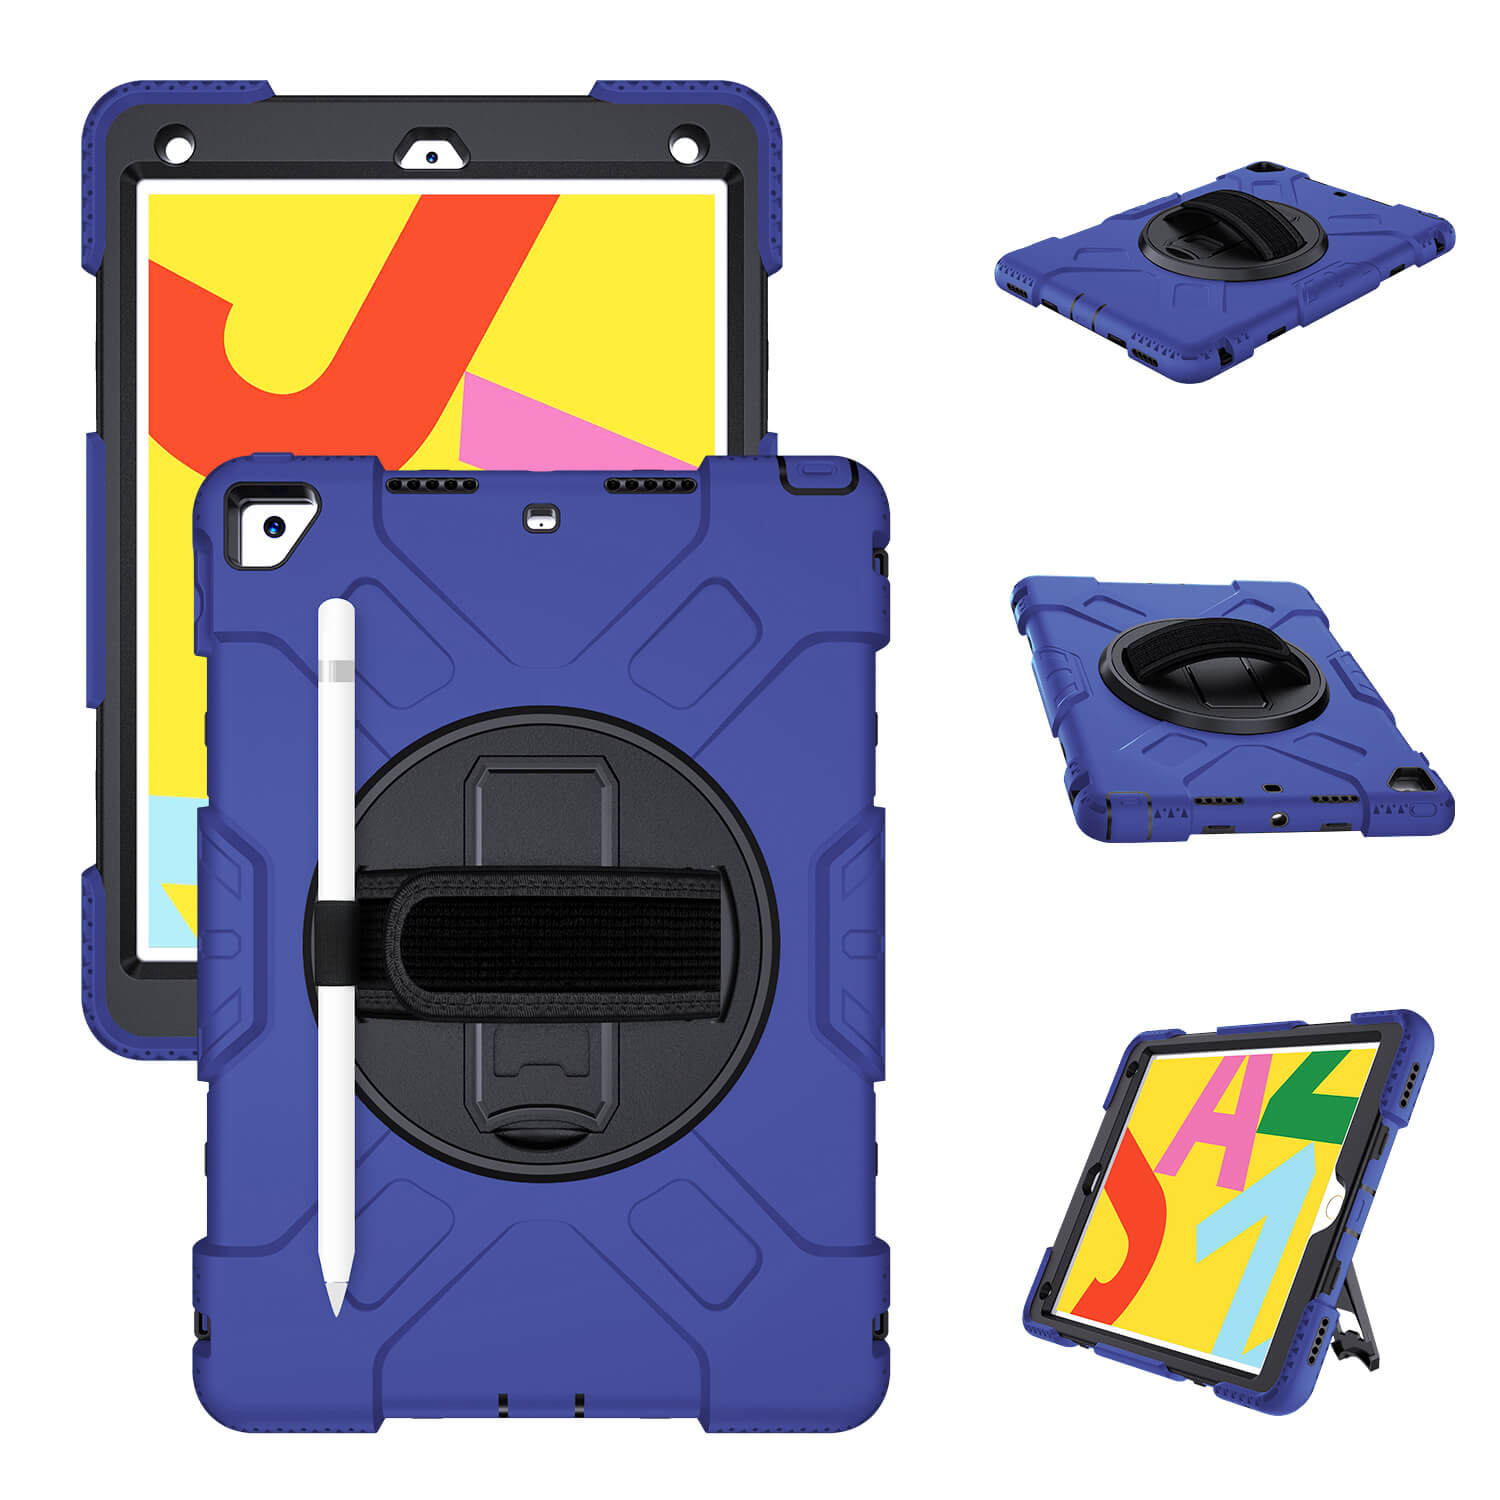 Tough On iPad 7 / 8th Gen 10.2" Case Rugged Protection Blue